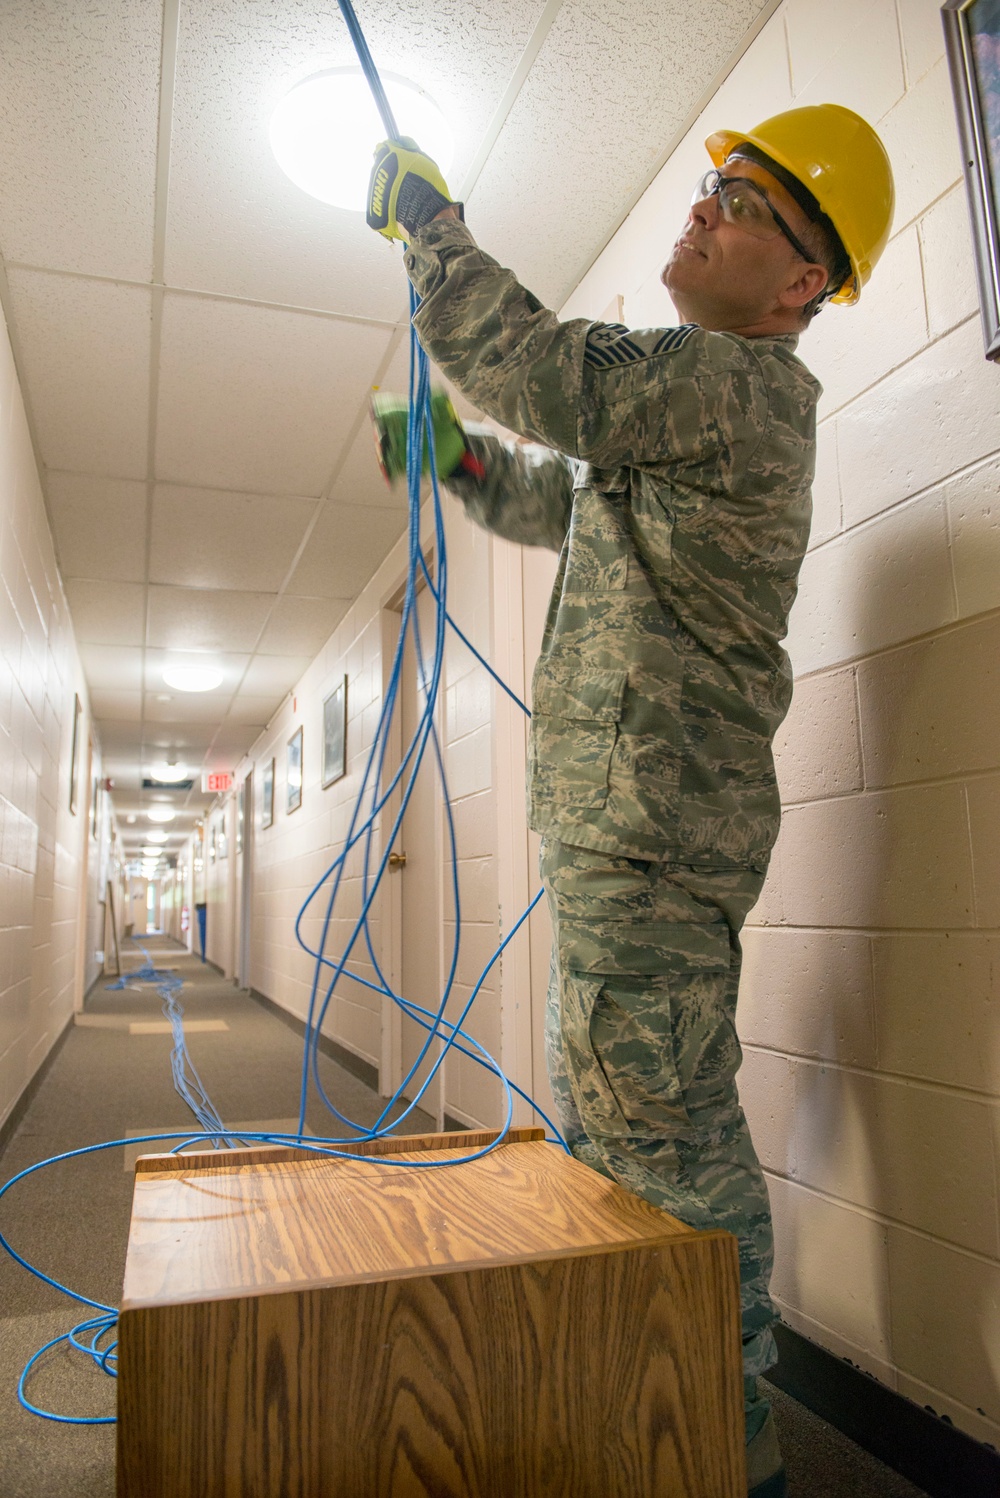 Troop Camp upgraded with stronger, faster wireless internet access